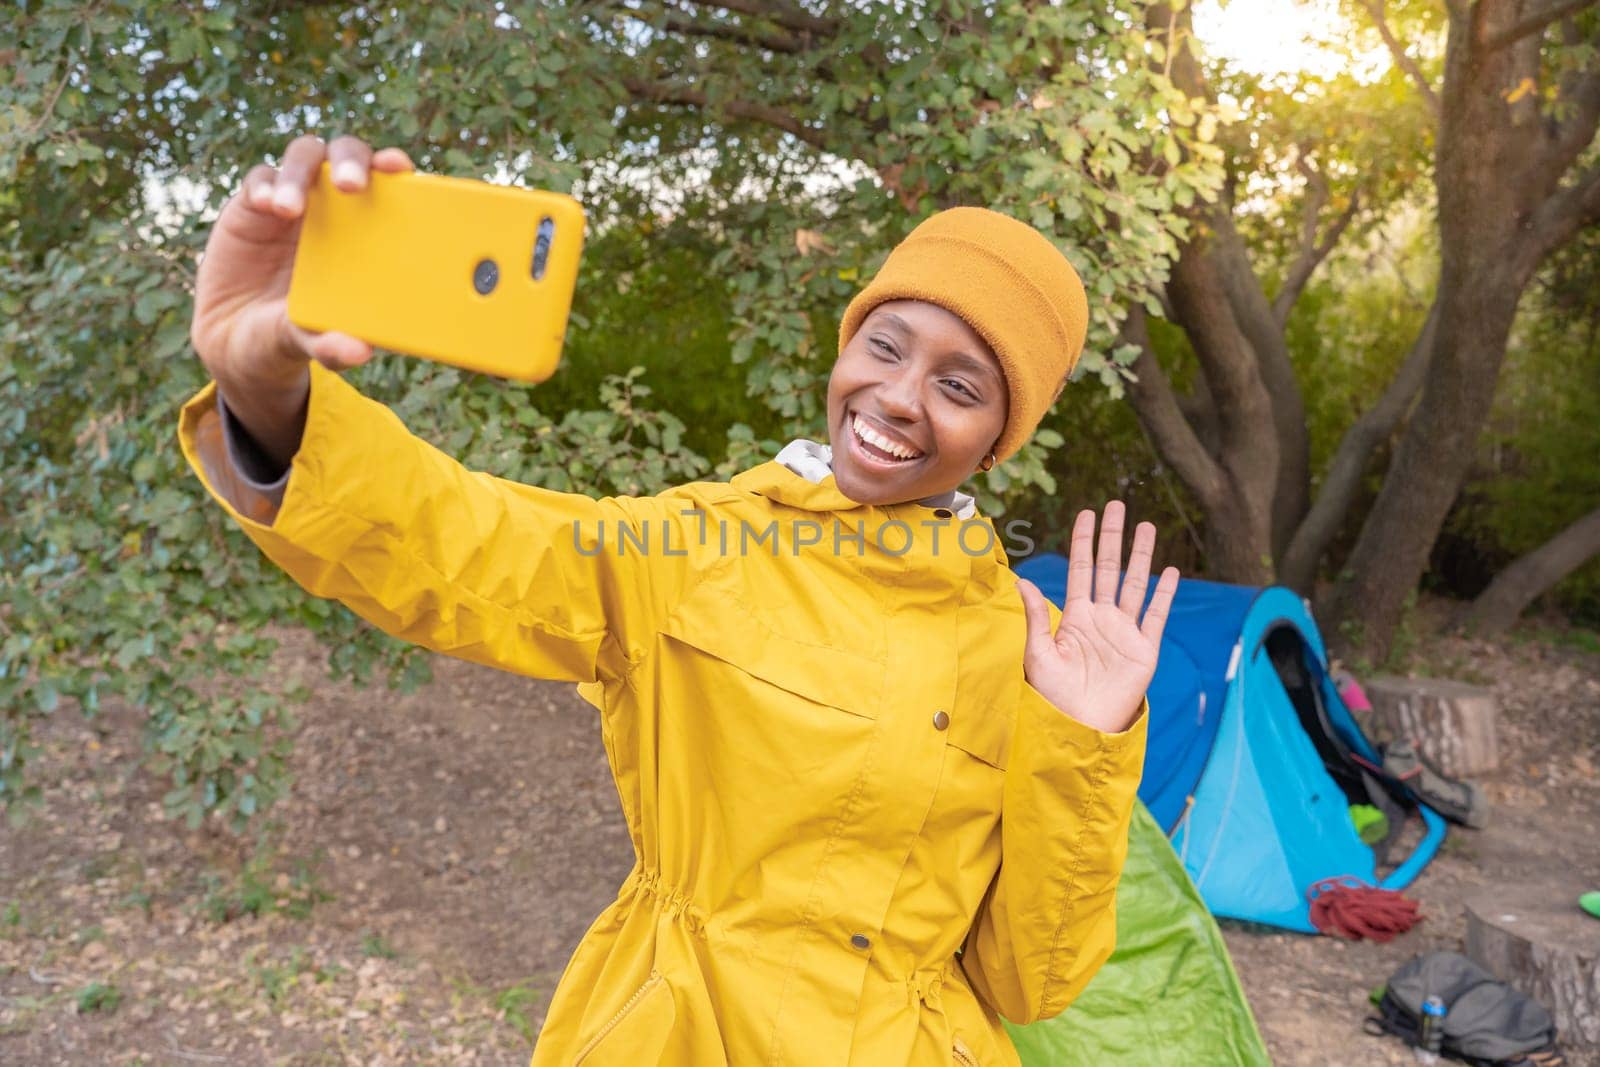 A happy woman wearing a yellow raincoat is smiling as she takes a selfie with her cell phone, surrounded by nature. High quality photo